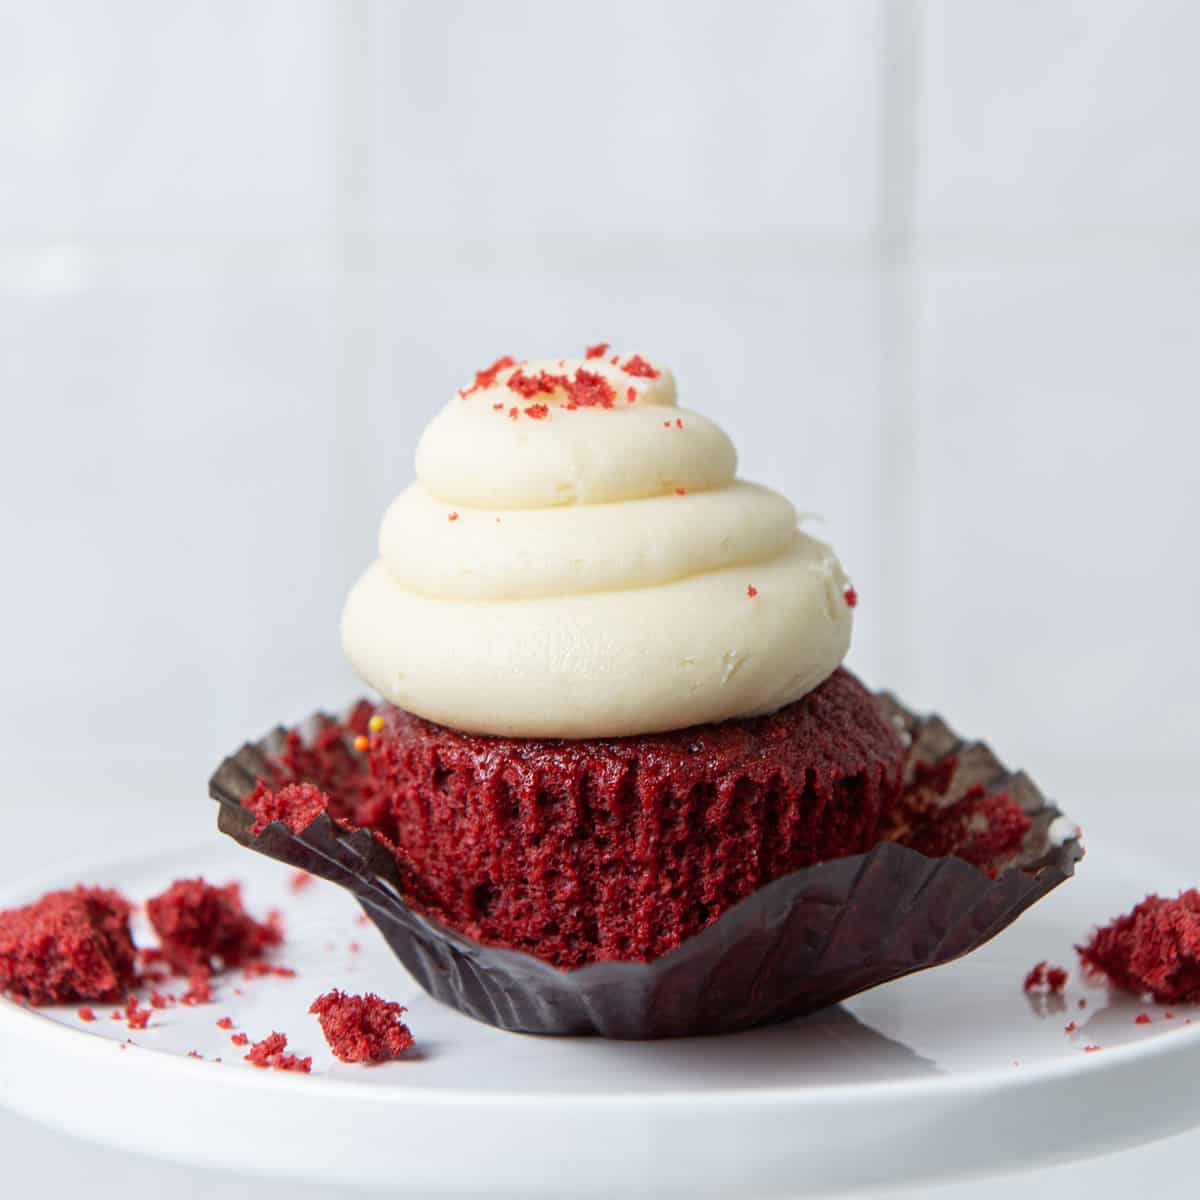 A cupcake on a white plate.